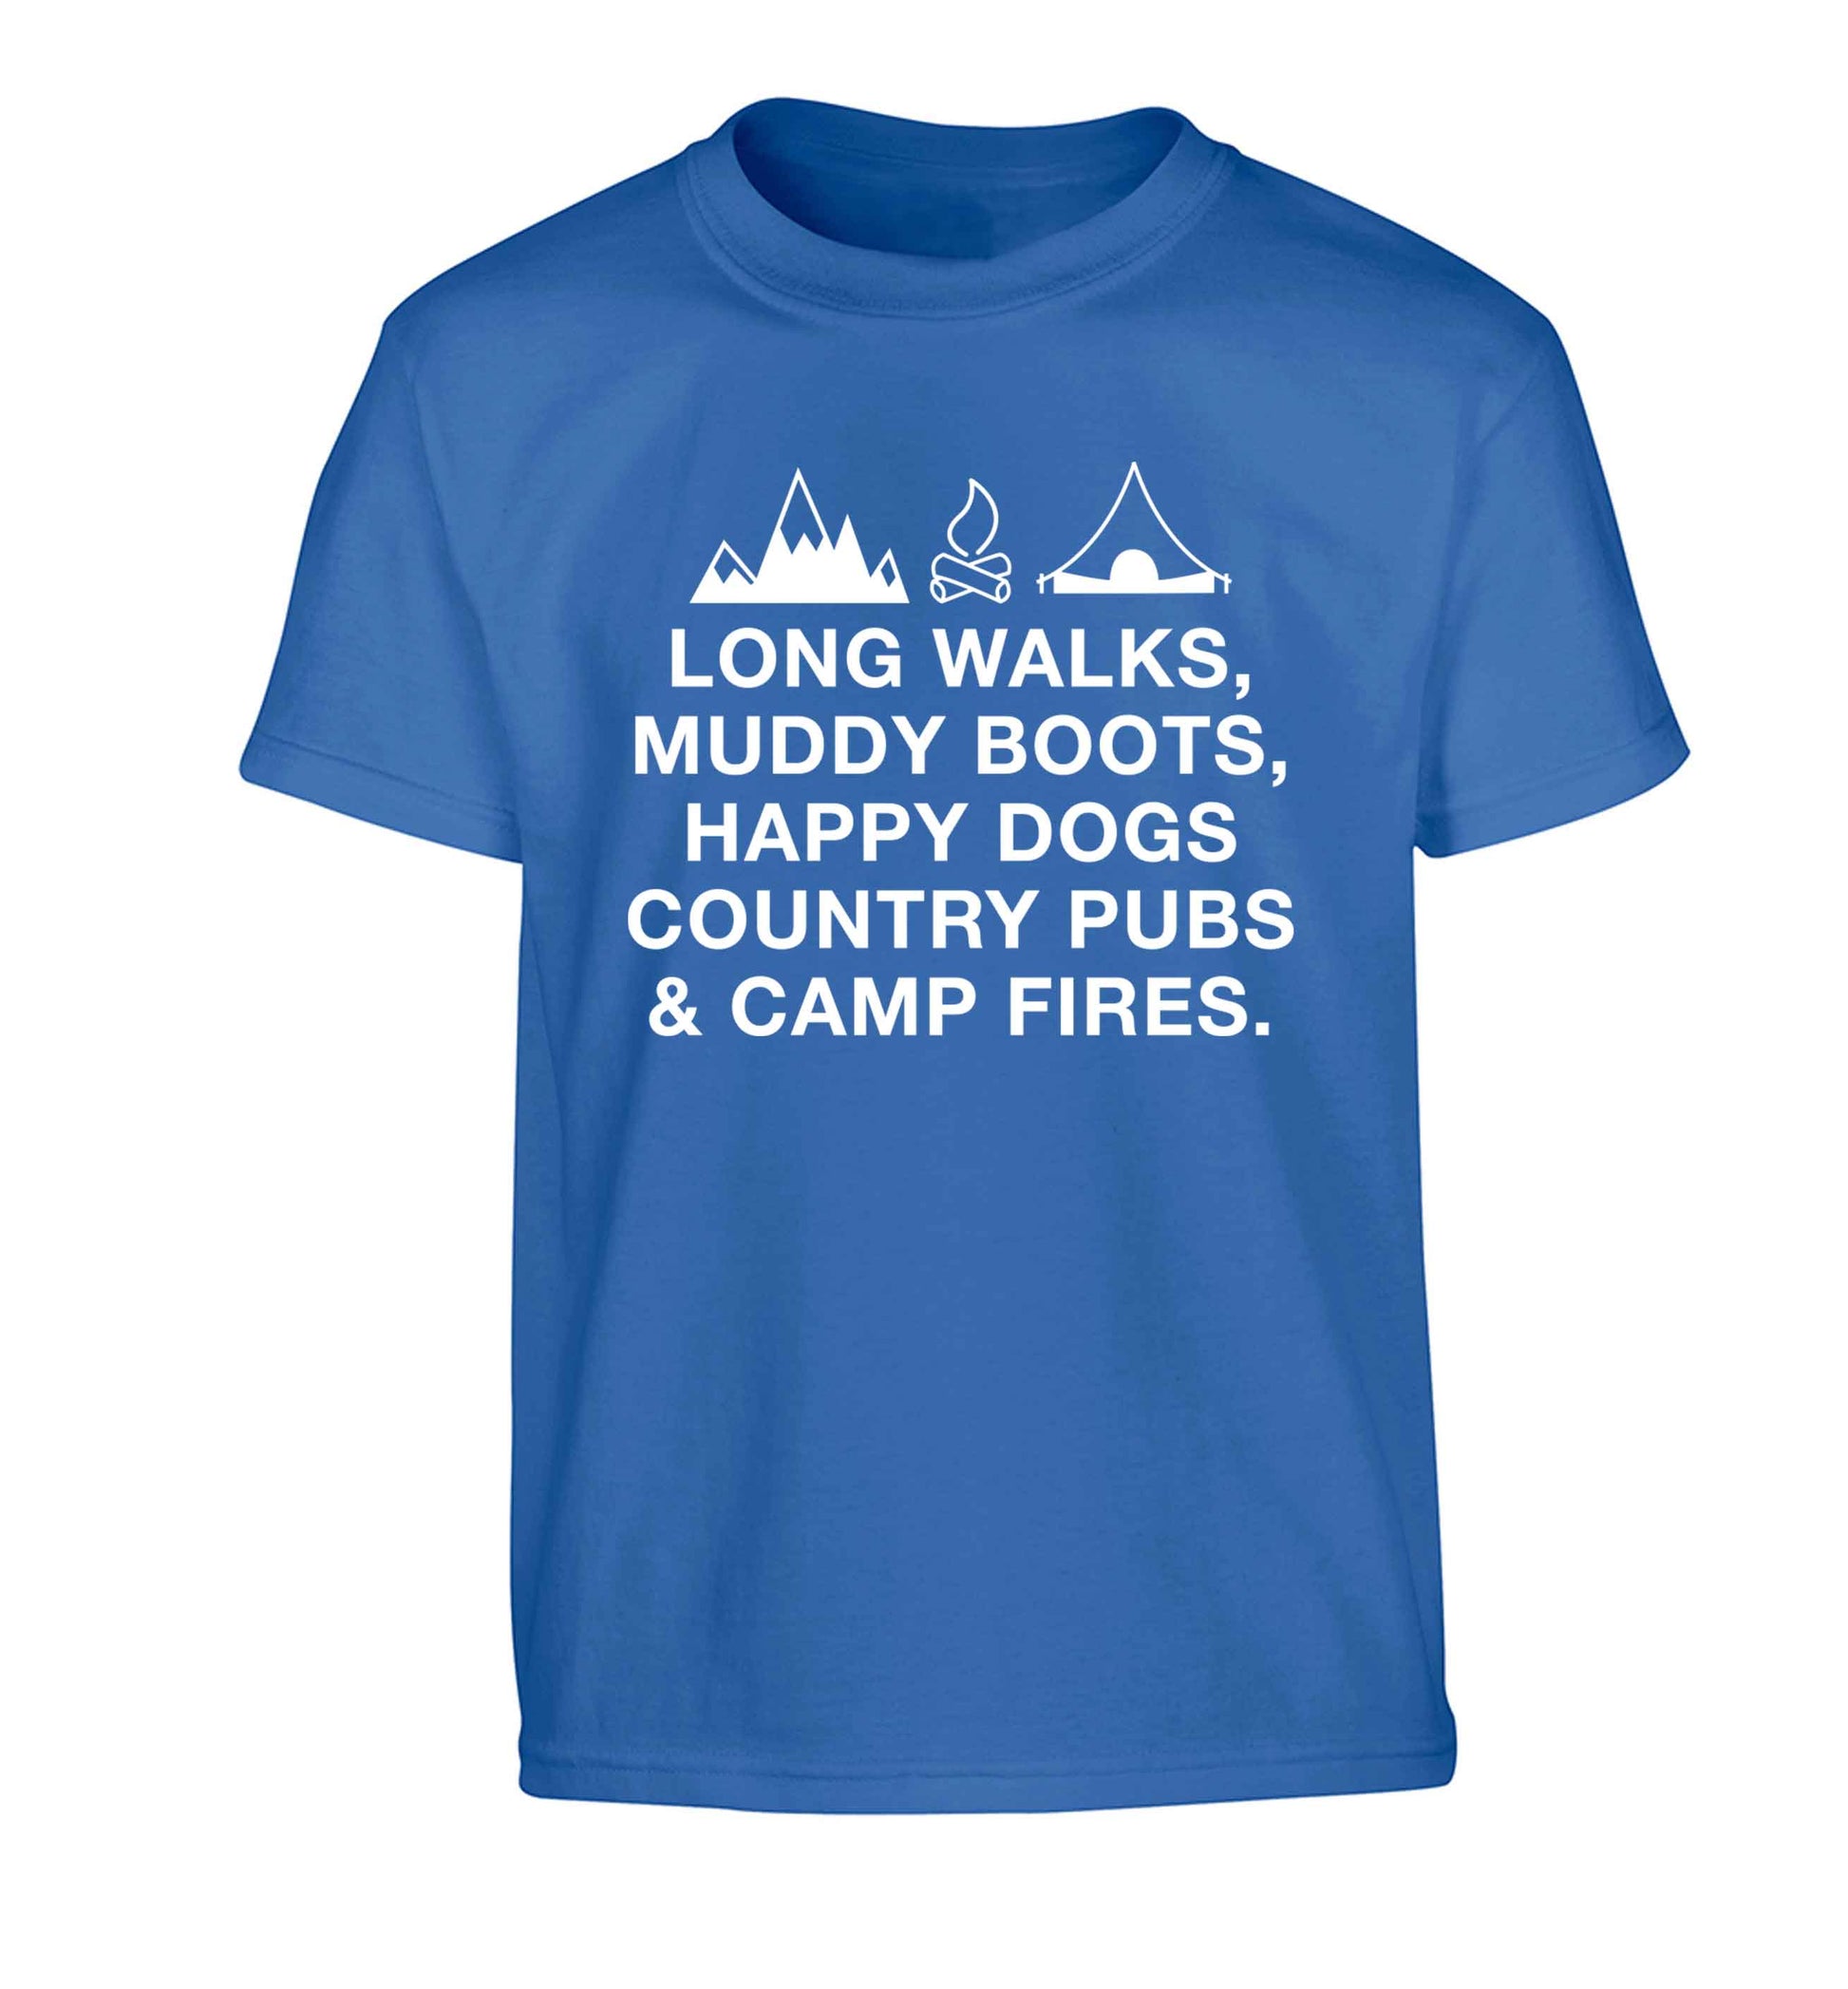 Long walks muddy boots happy dogs country pubs and camp fires Children's blue Tshirt 12-13 Years